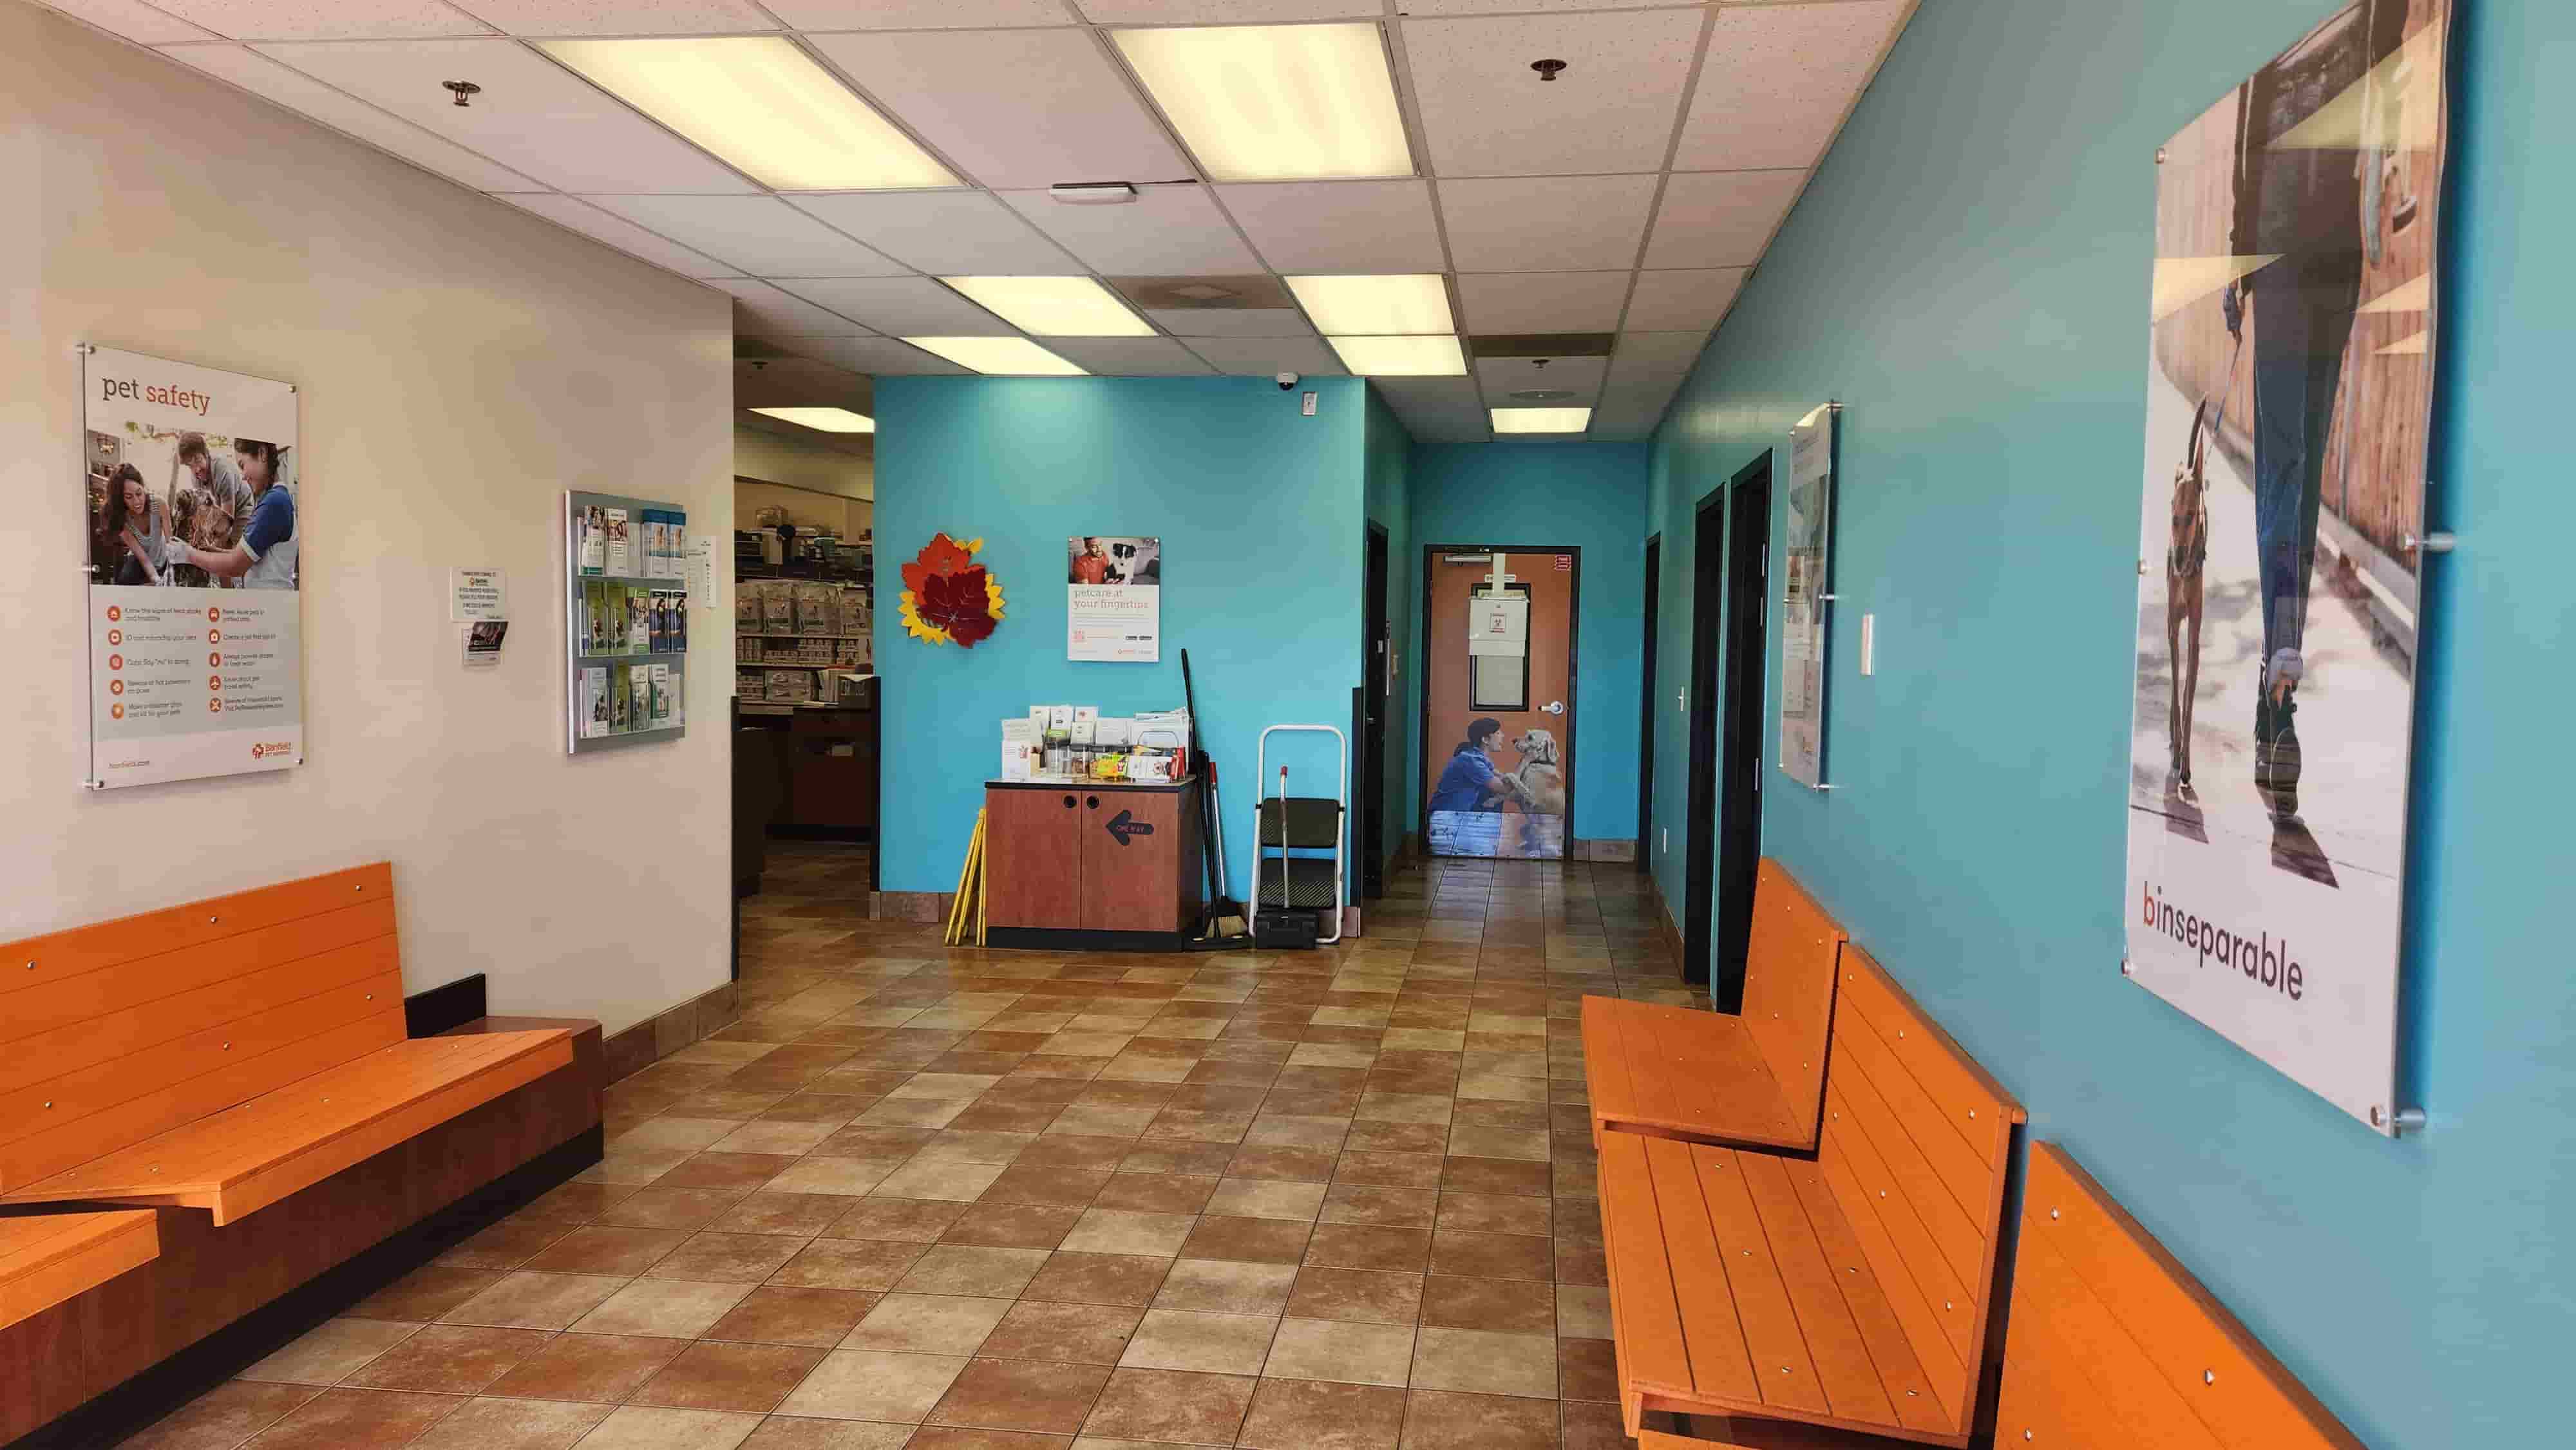 The waiting area of the Columbus hospital